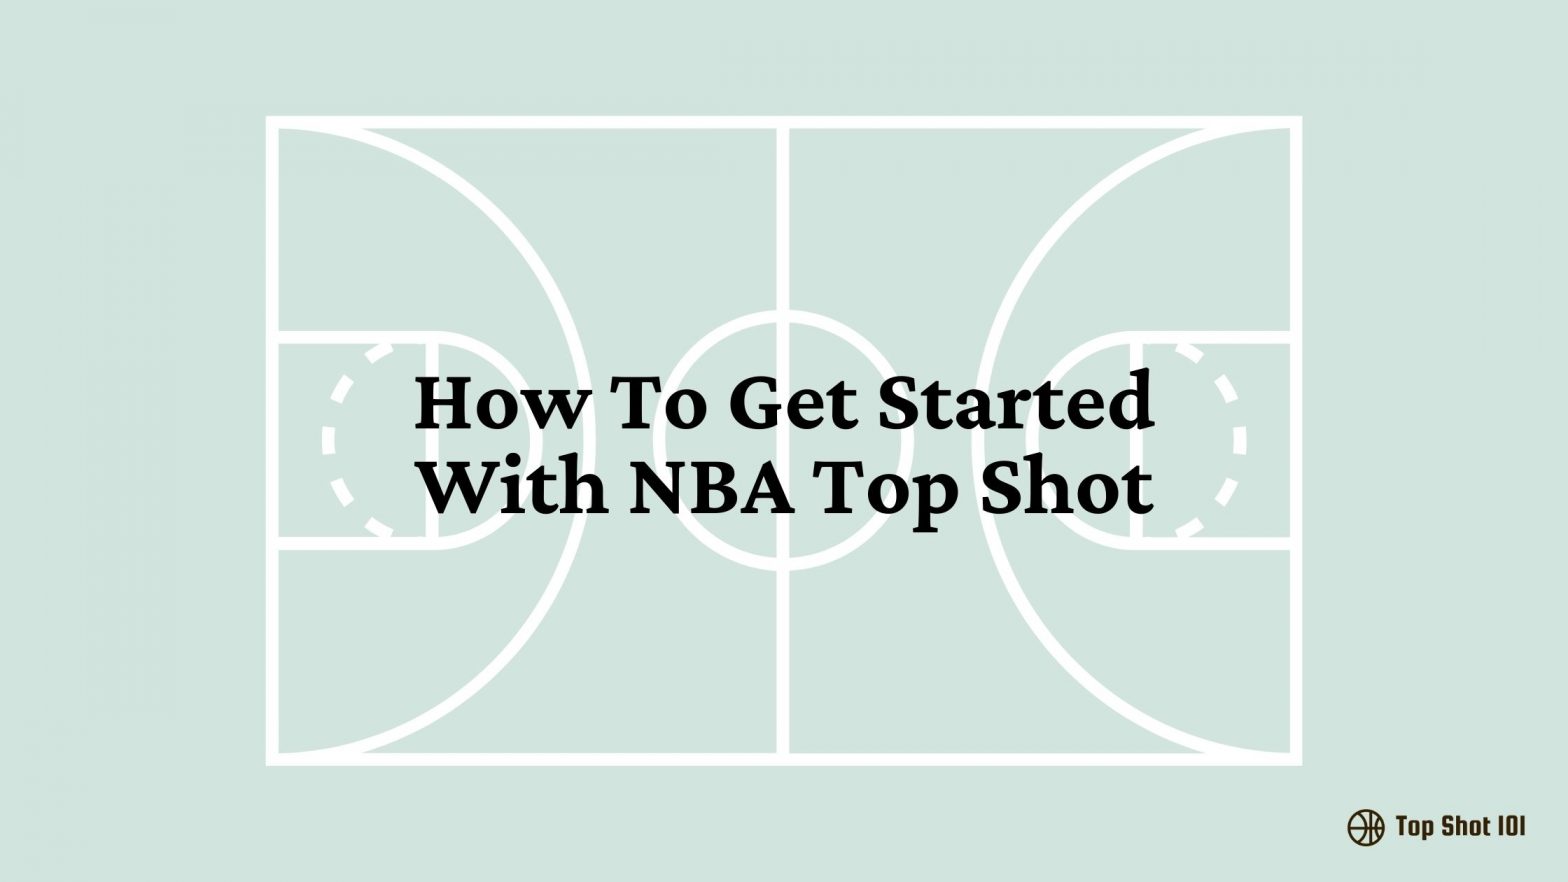 How To Get Started With NBA Top Shot